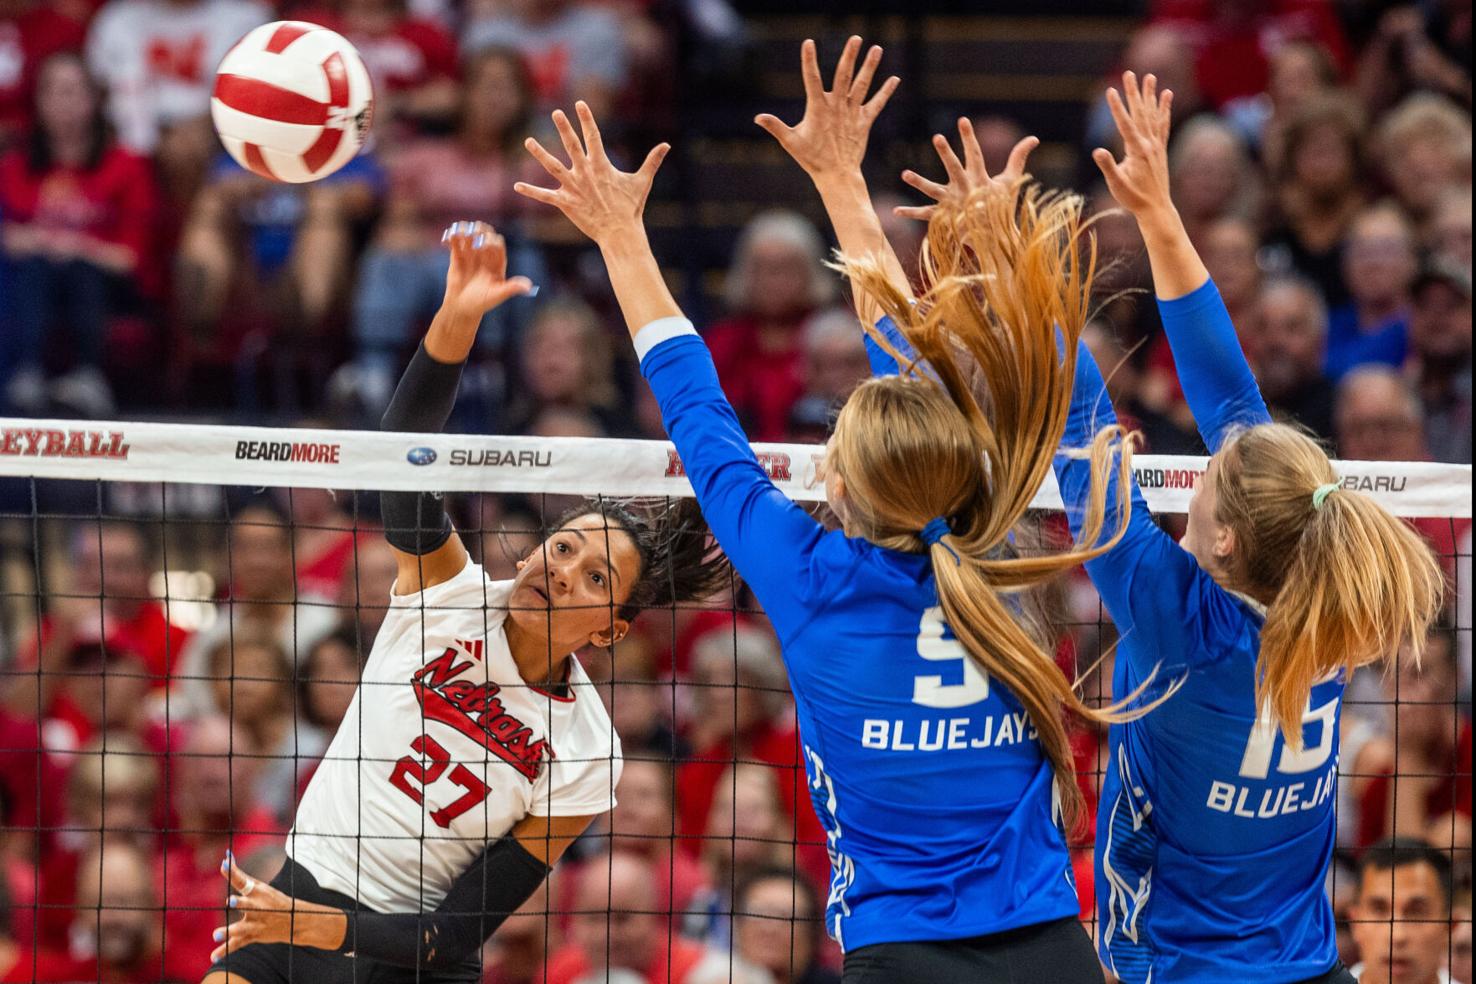 Where Nebraska and Creighton are in the volleyball rankings